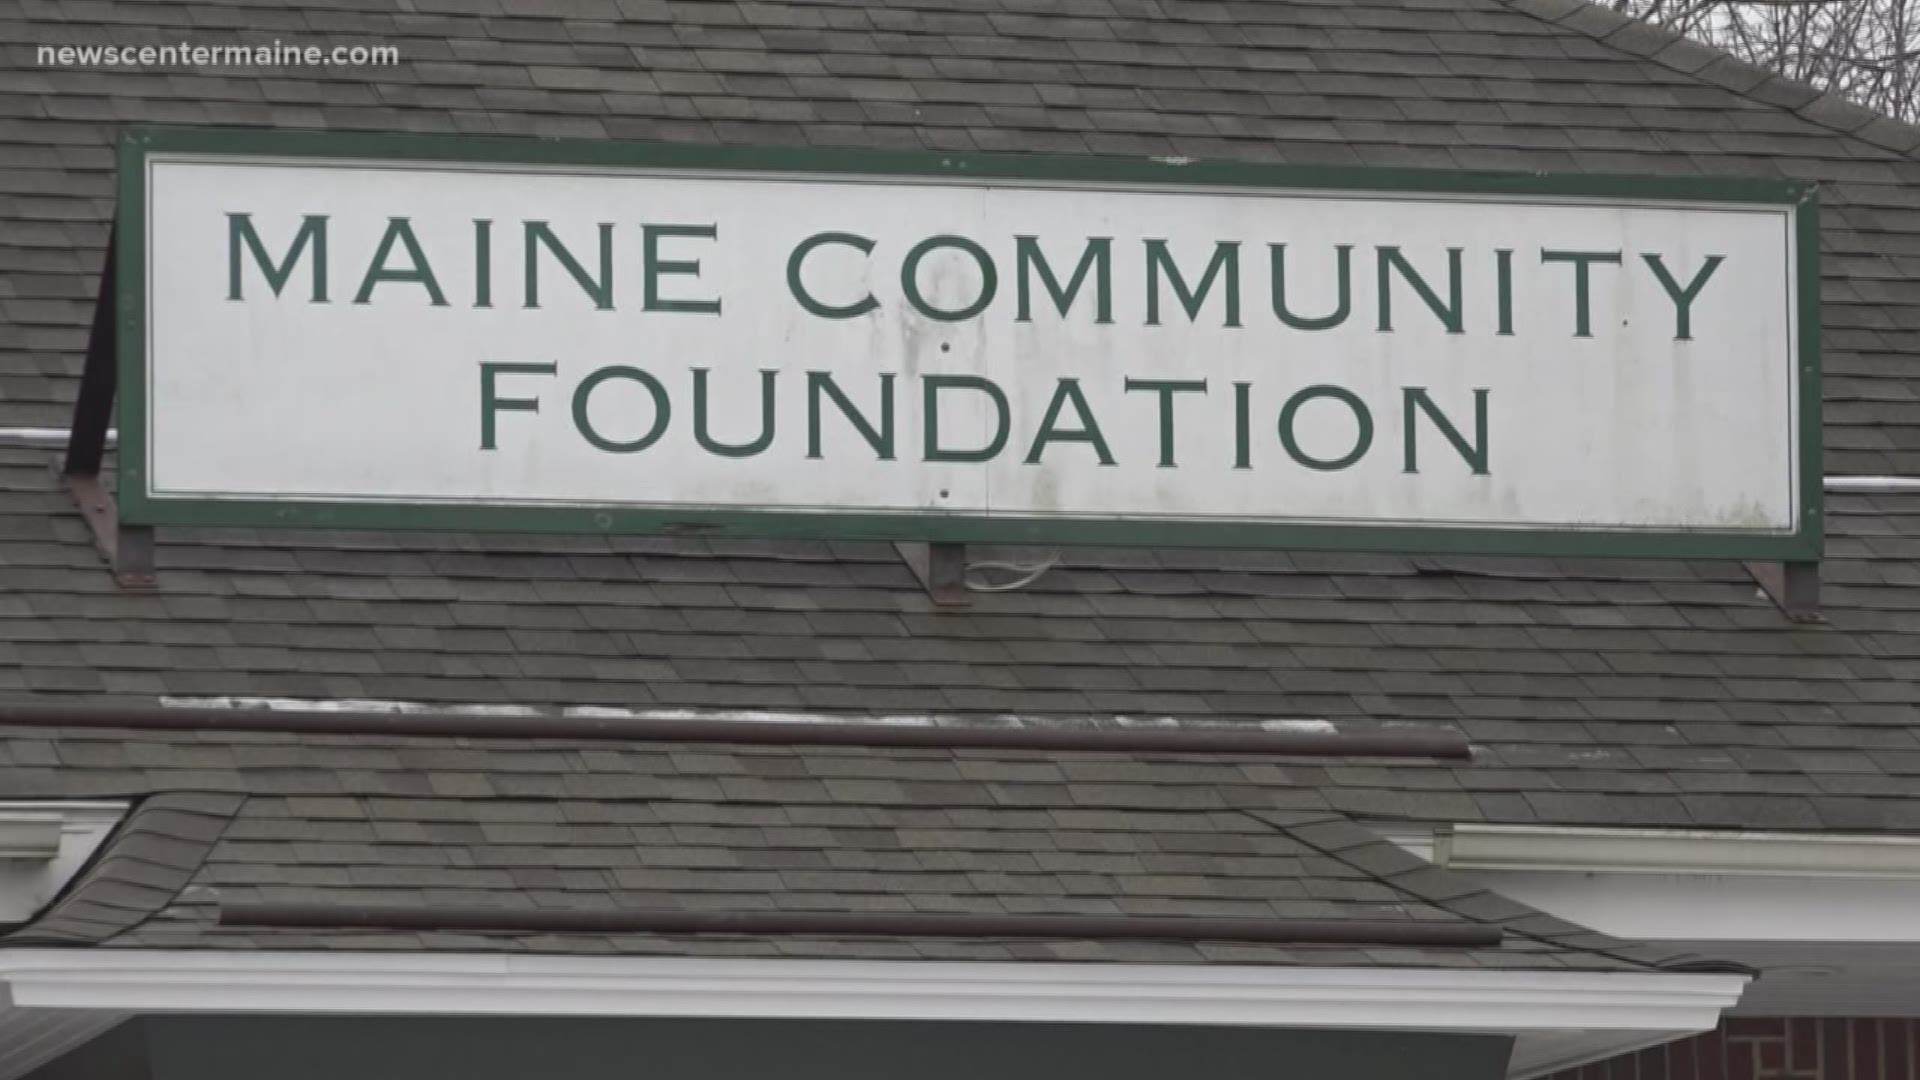 Maine's Community Building Grant Program provides grants to schools, local government, and public libraries